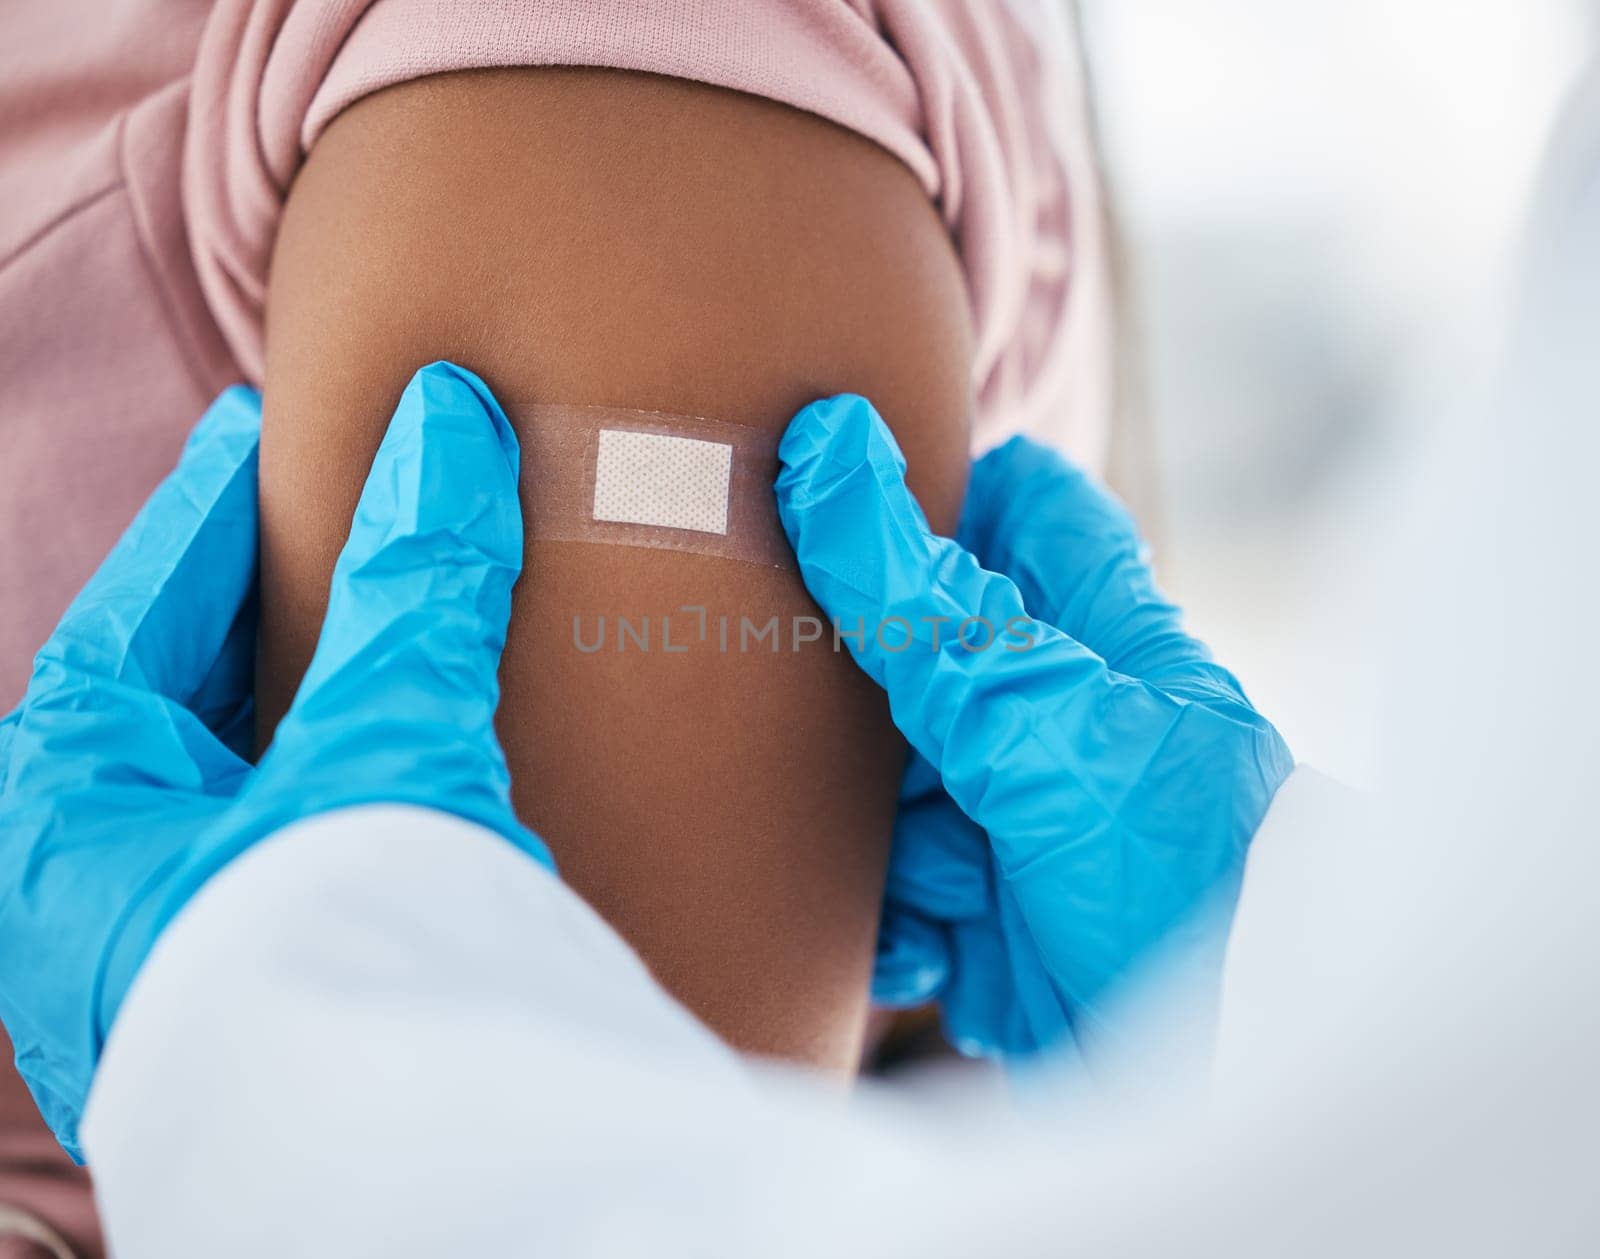 Plaster on patient arm from doctor, vaccine and flu shot, healthcare and medical insurance for hpv, covid 19 and safety in hospital. Nurse hands bandaid, corona virus immunity and consulting service by YuriArcurs